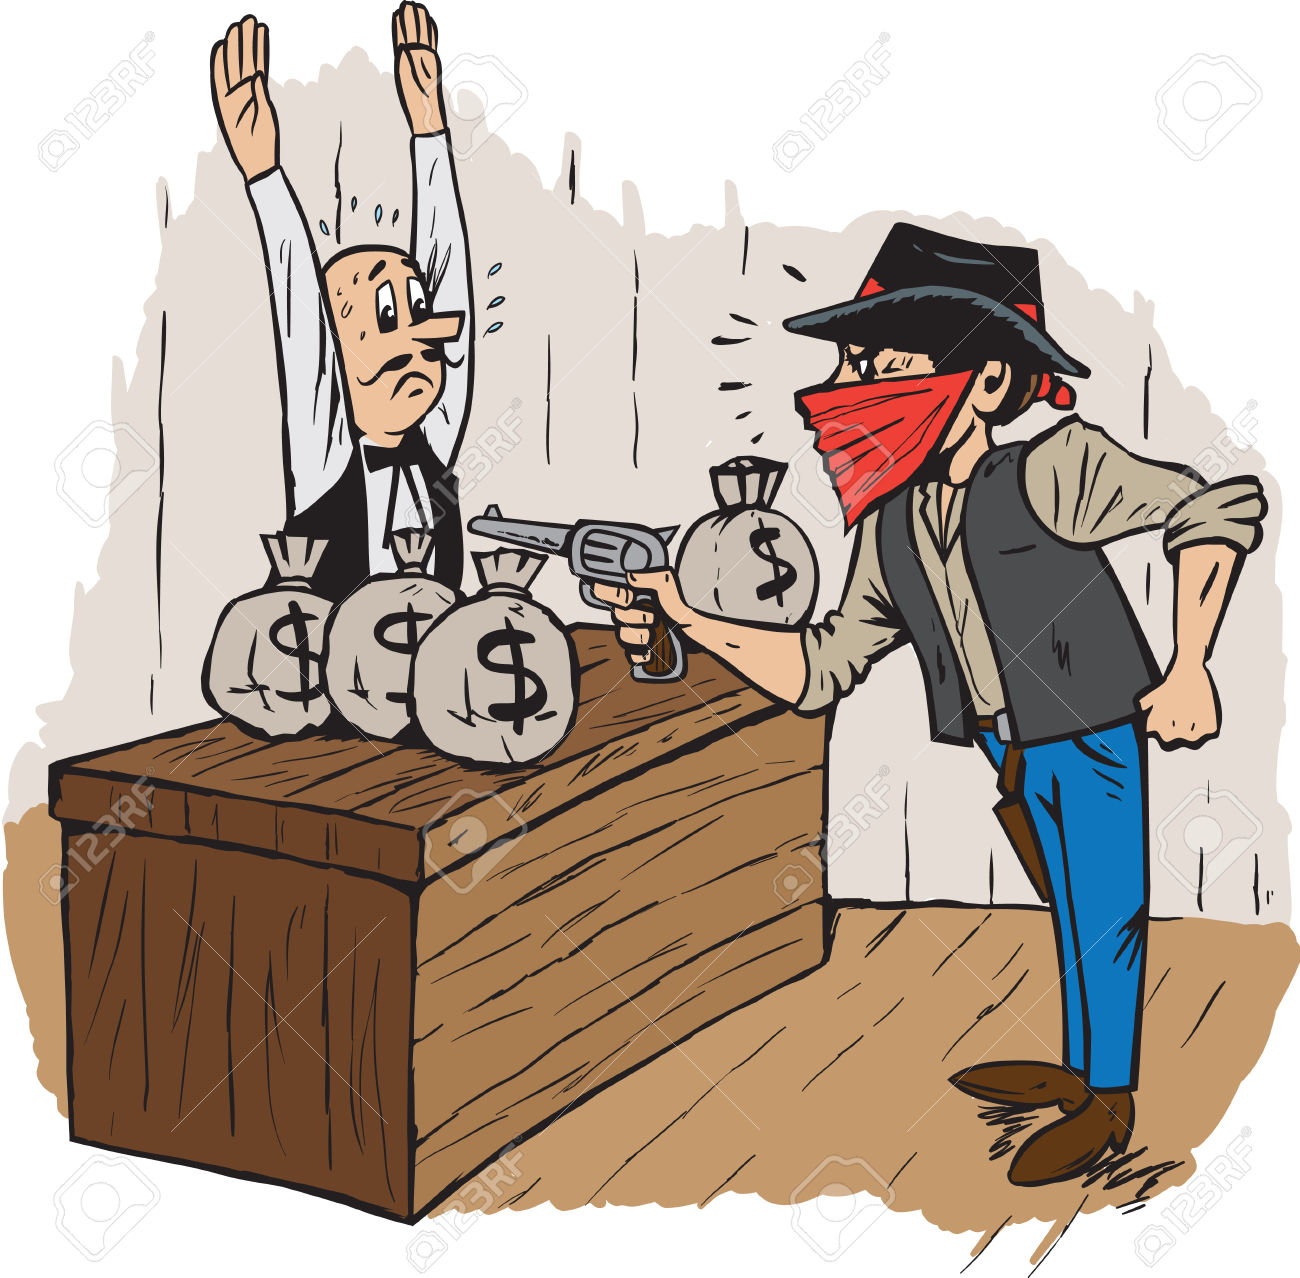 Robbery clipart - Clipground